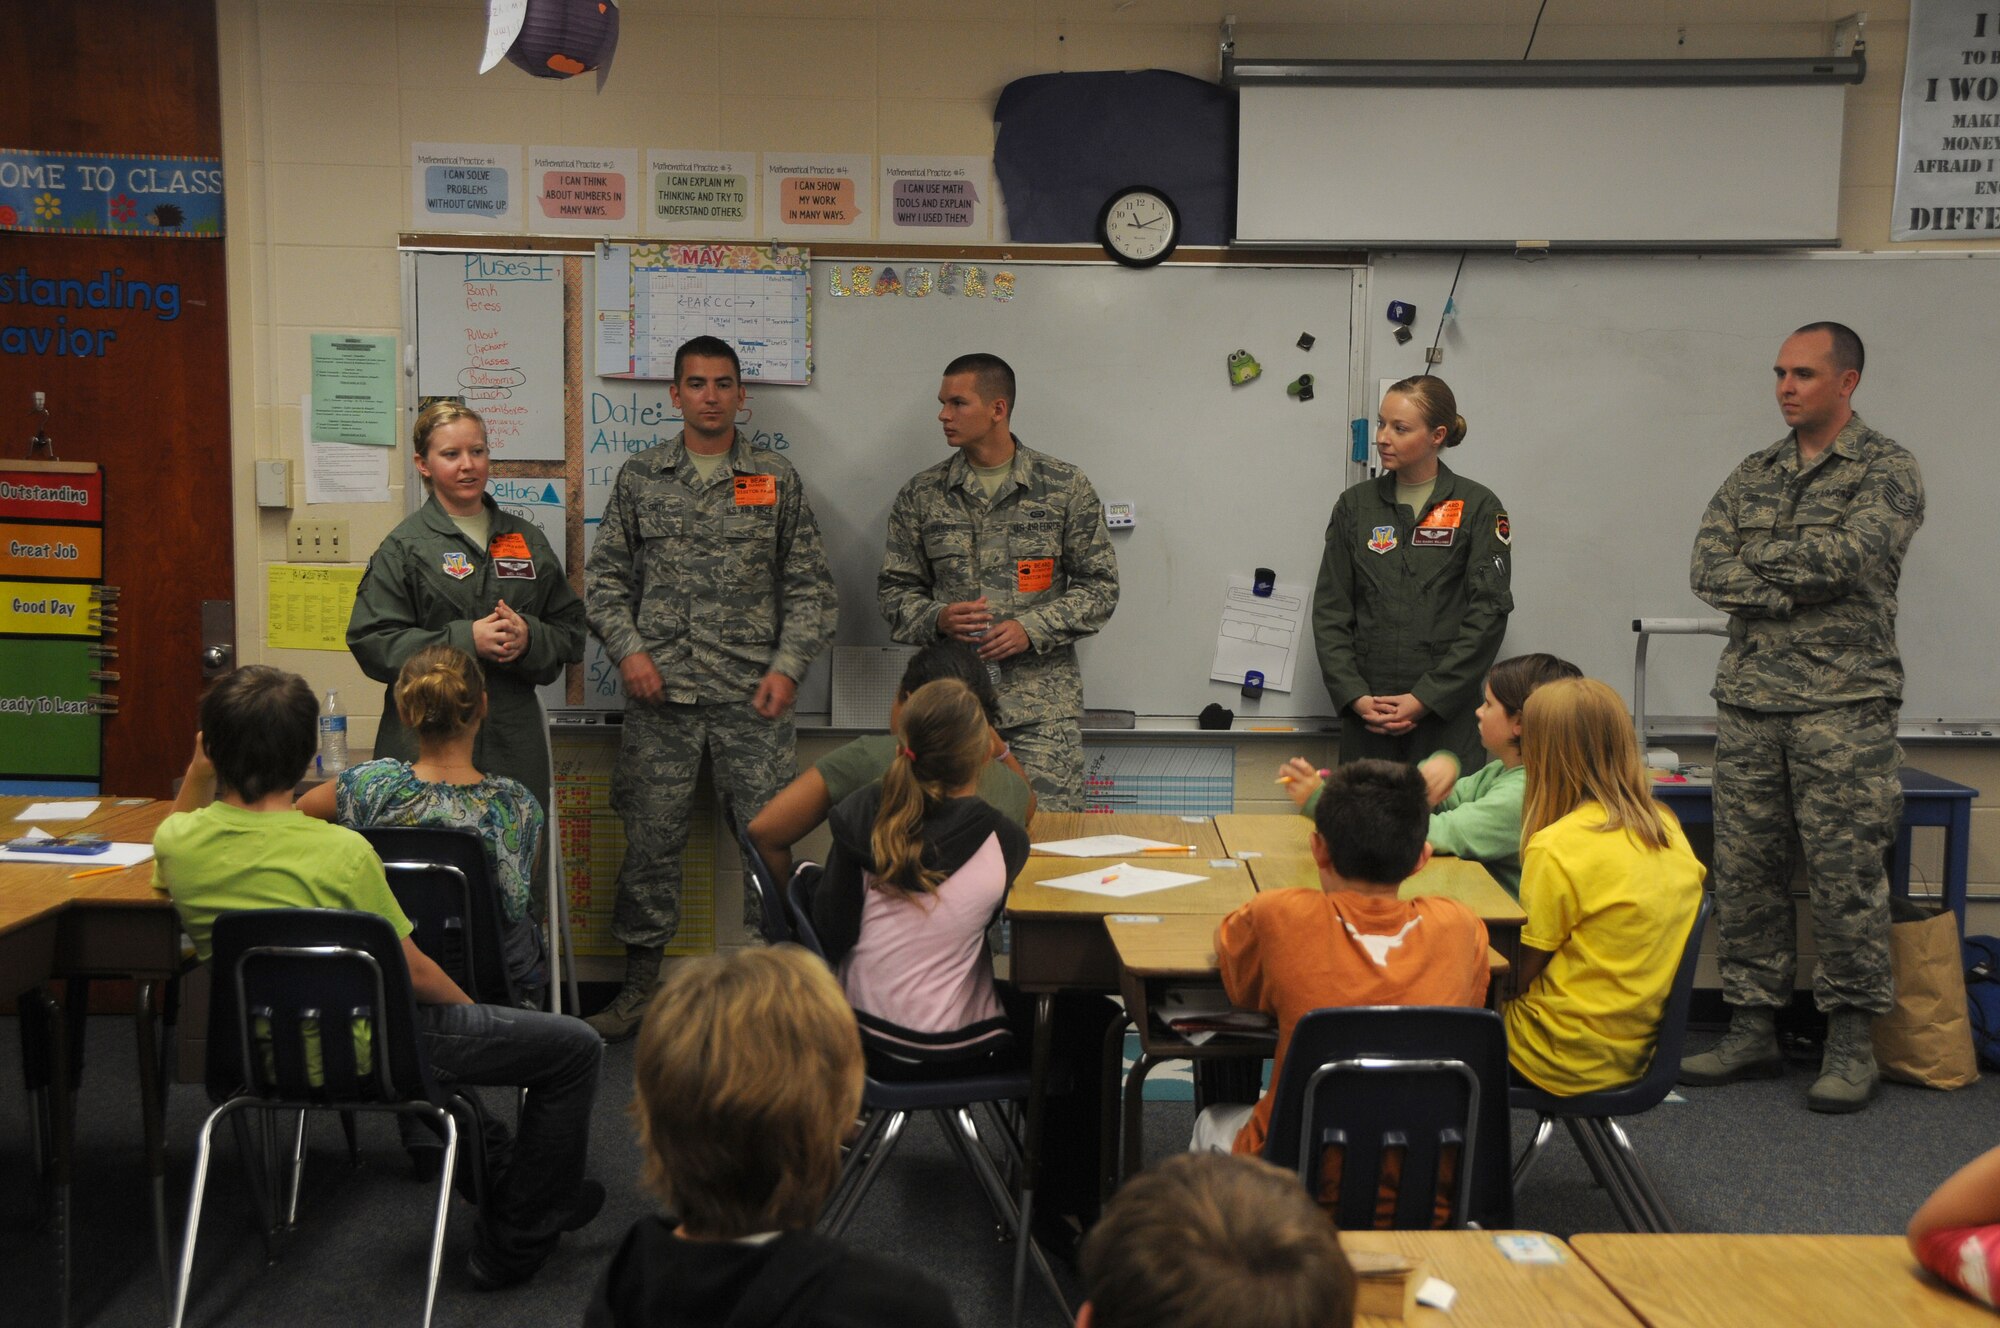 Guardsmen from the 188th Wing participate in Career Day hosted by Beard Elementary School, Fort Smith, Ark. The Airmen talked to students about new jobs following the 188th's transition to a remotely piloted aircraft and intelligence, surveillance and reconnaissance mission. (U.S. Air National Guard photo by Senior Airman Cody Martin/released)